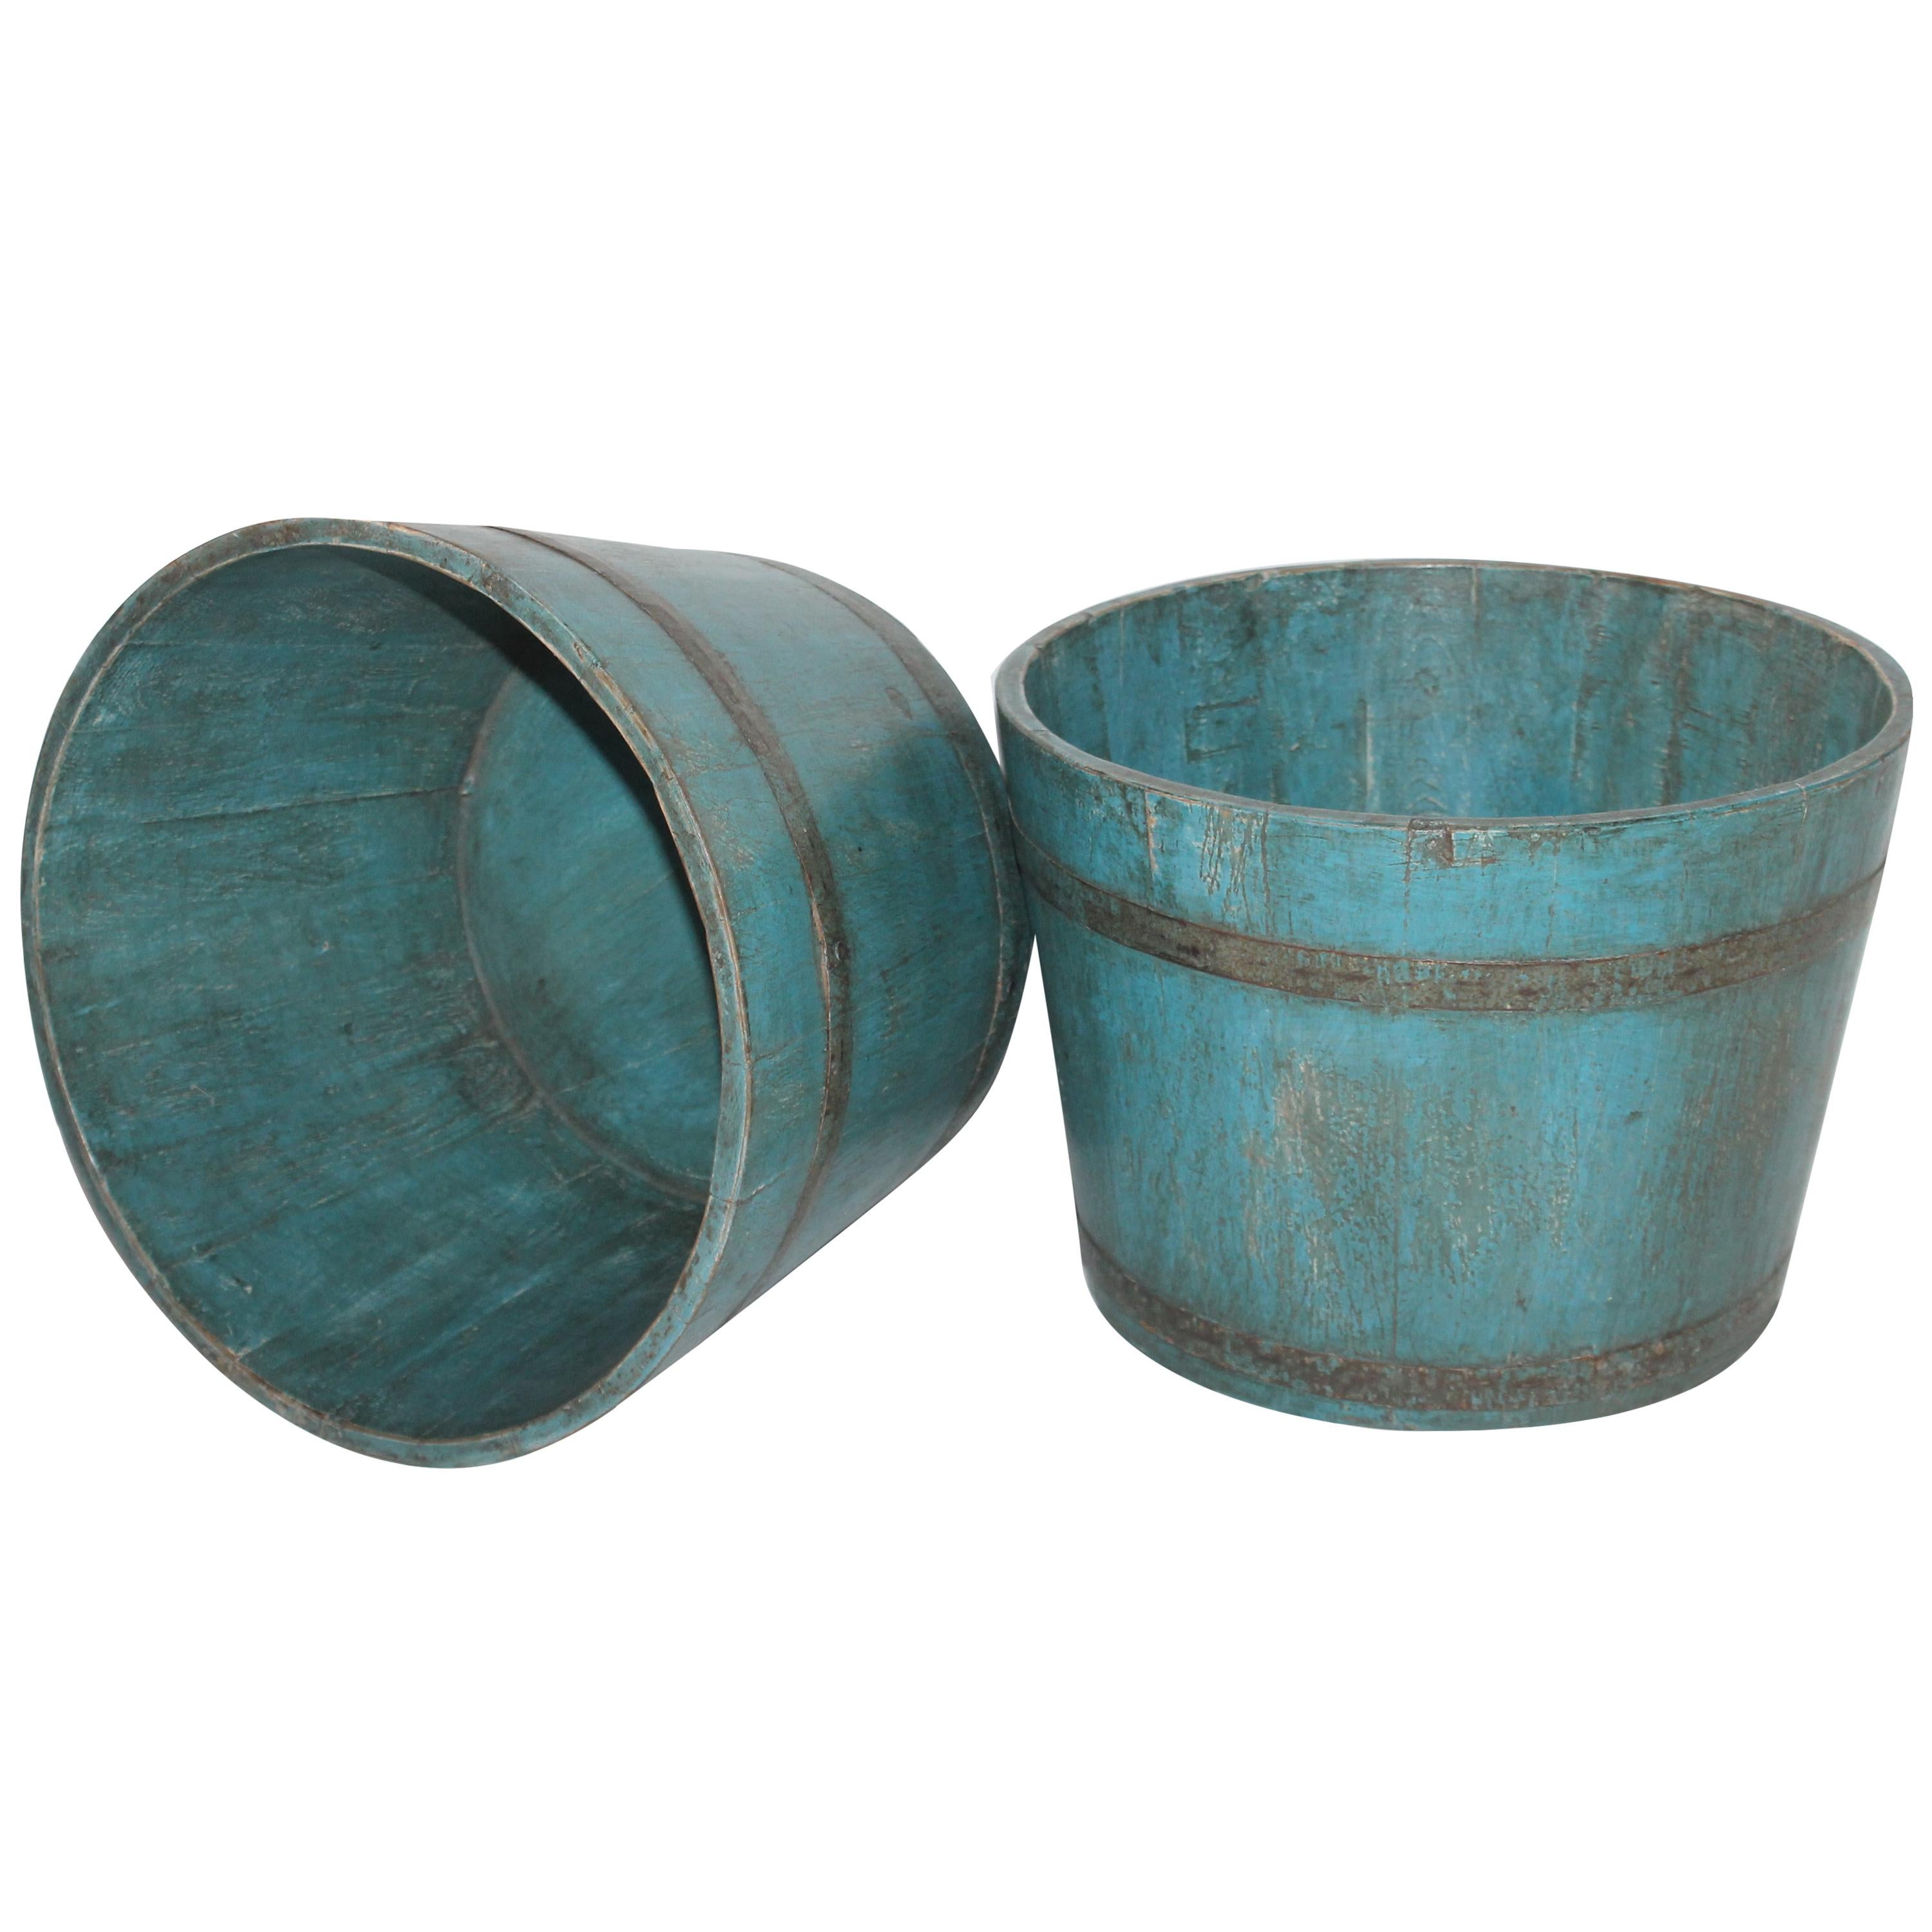 19th Century New England Blue Painted Buckets / Planters, Pair For Sale